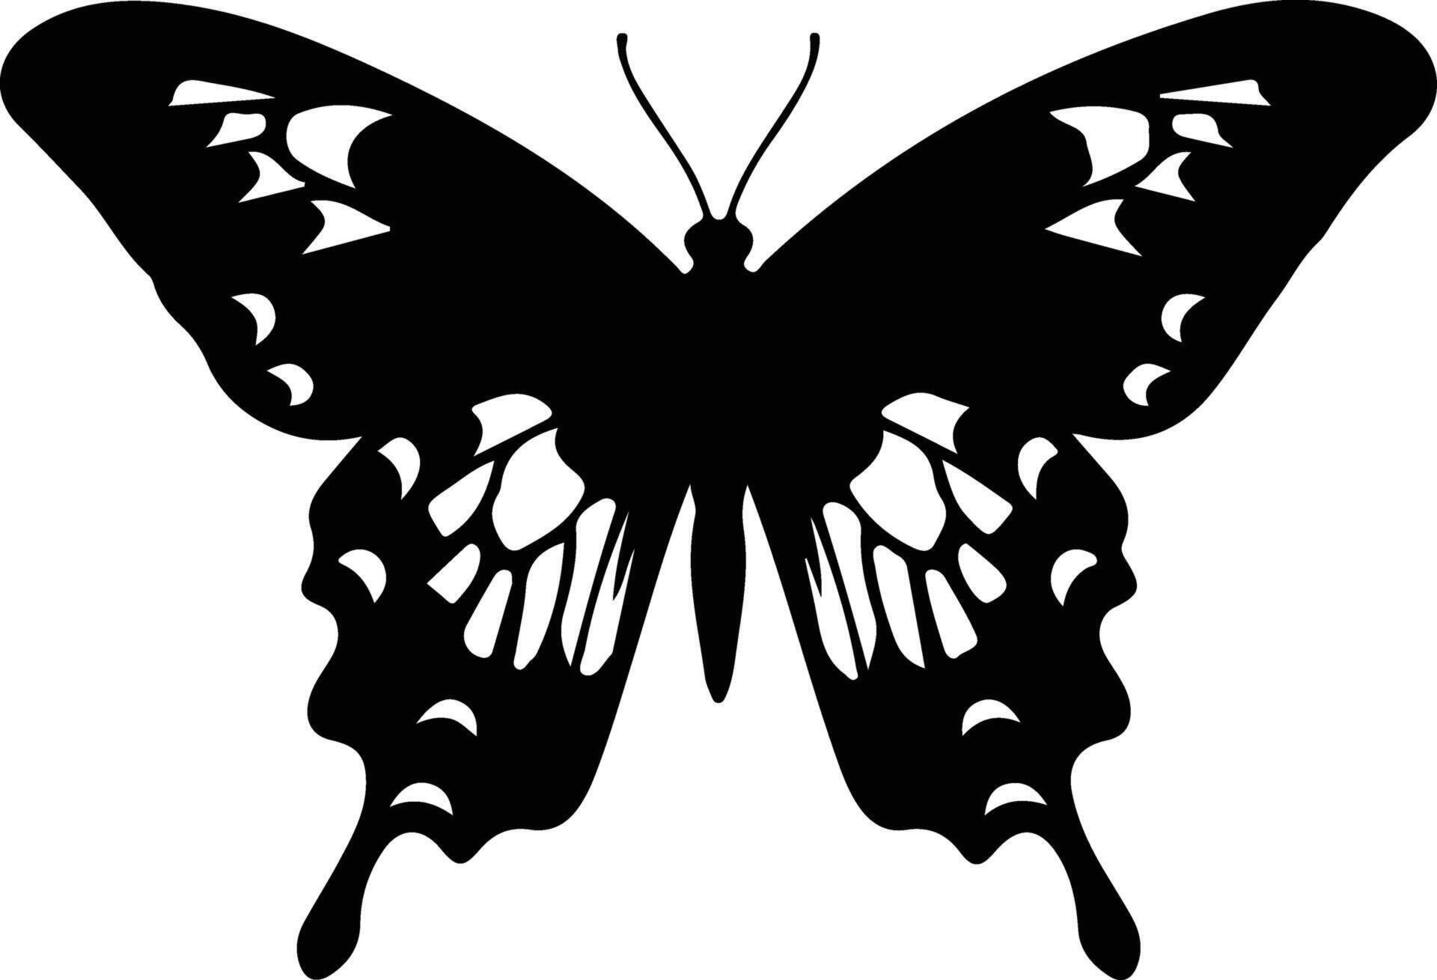 tiger swallowtail butterfly  black silhouette vector